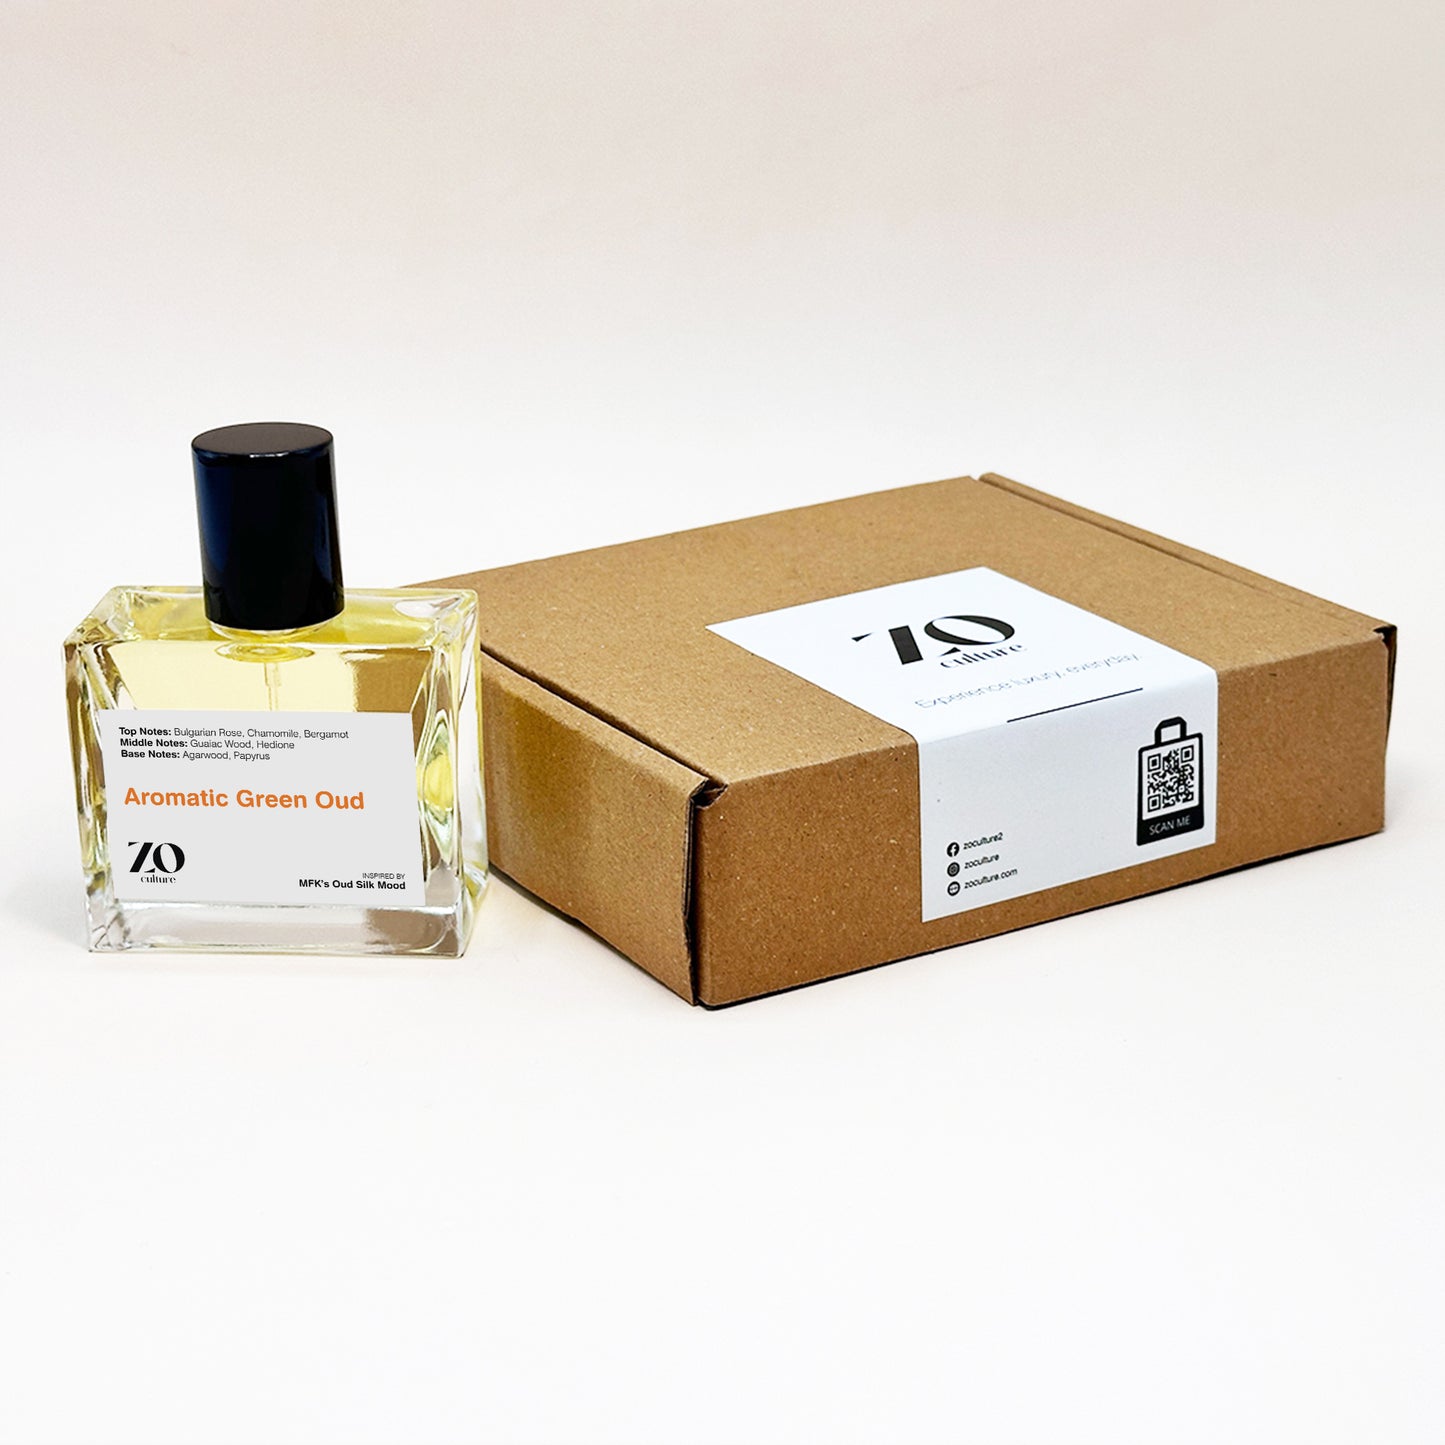 Unisex Aromatic Green Oud - Inspired by Oud Silk Mood ZoCulture